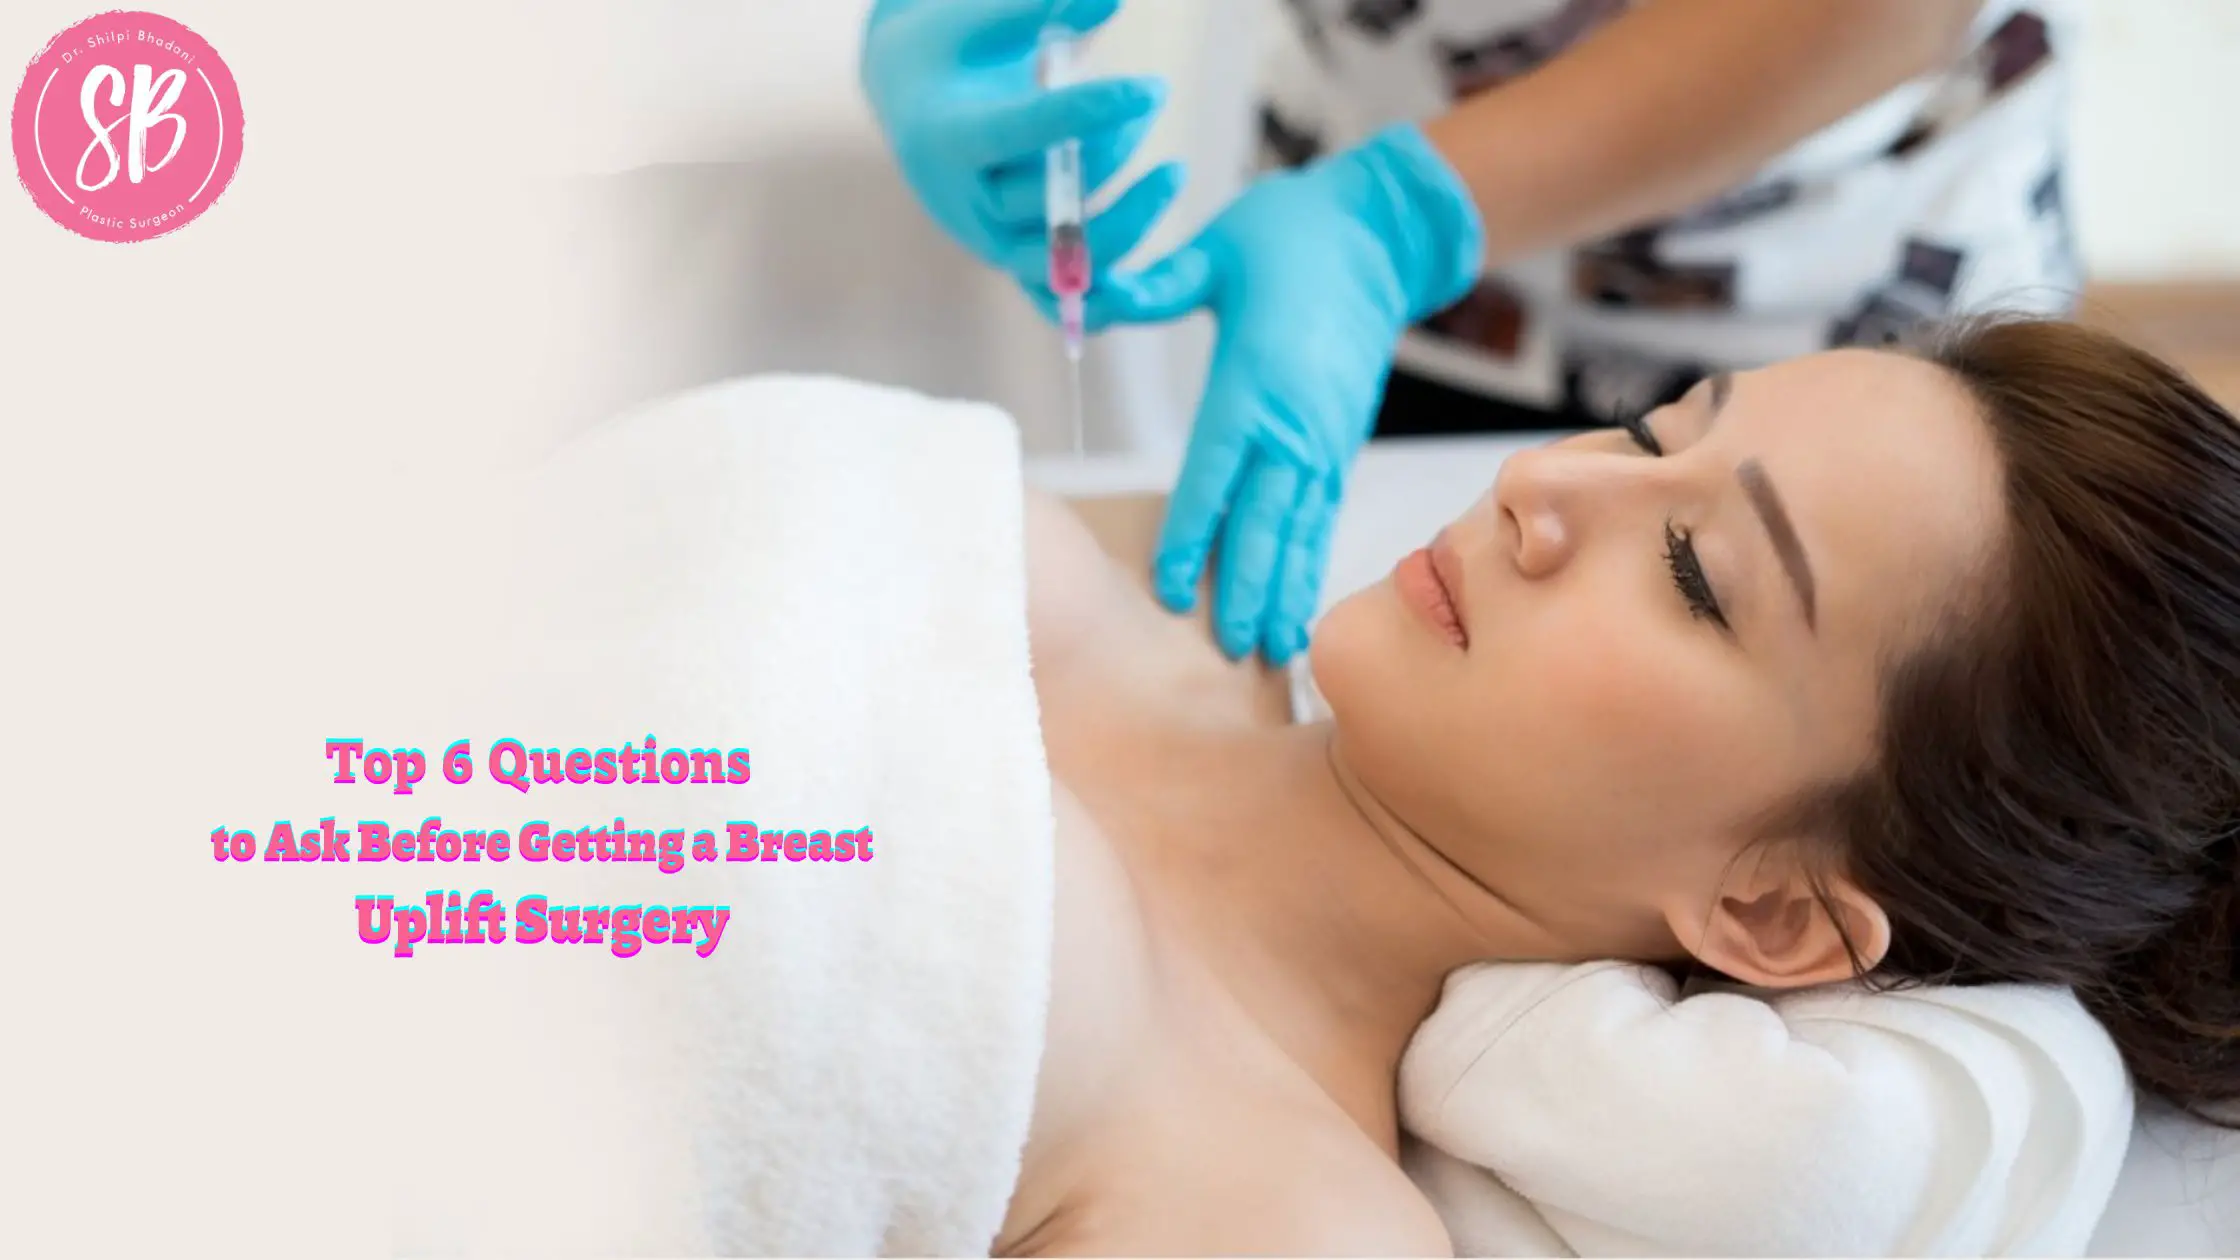 Top 6 Questions to Ask Before Getting a Breast Uplift Surgery